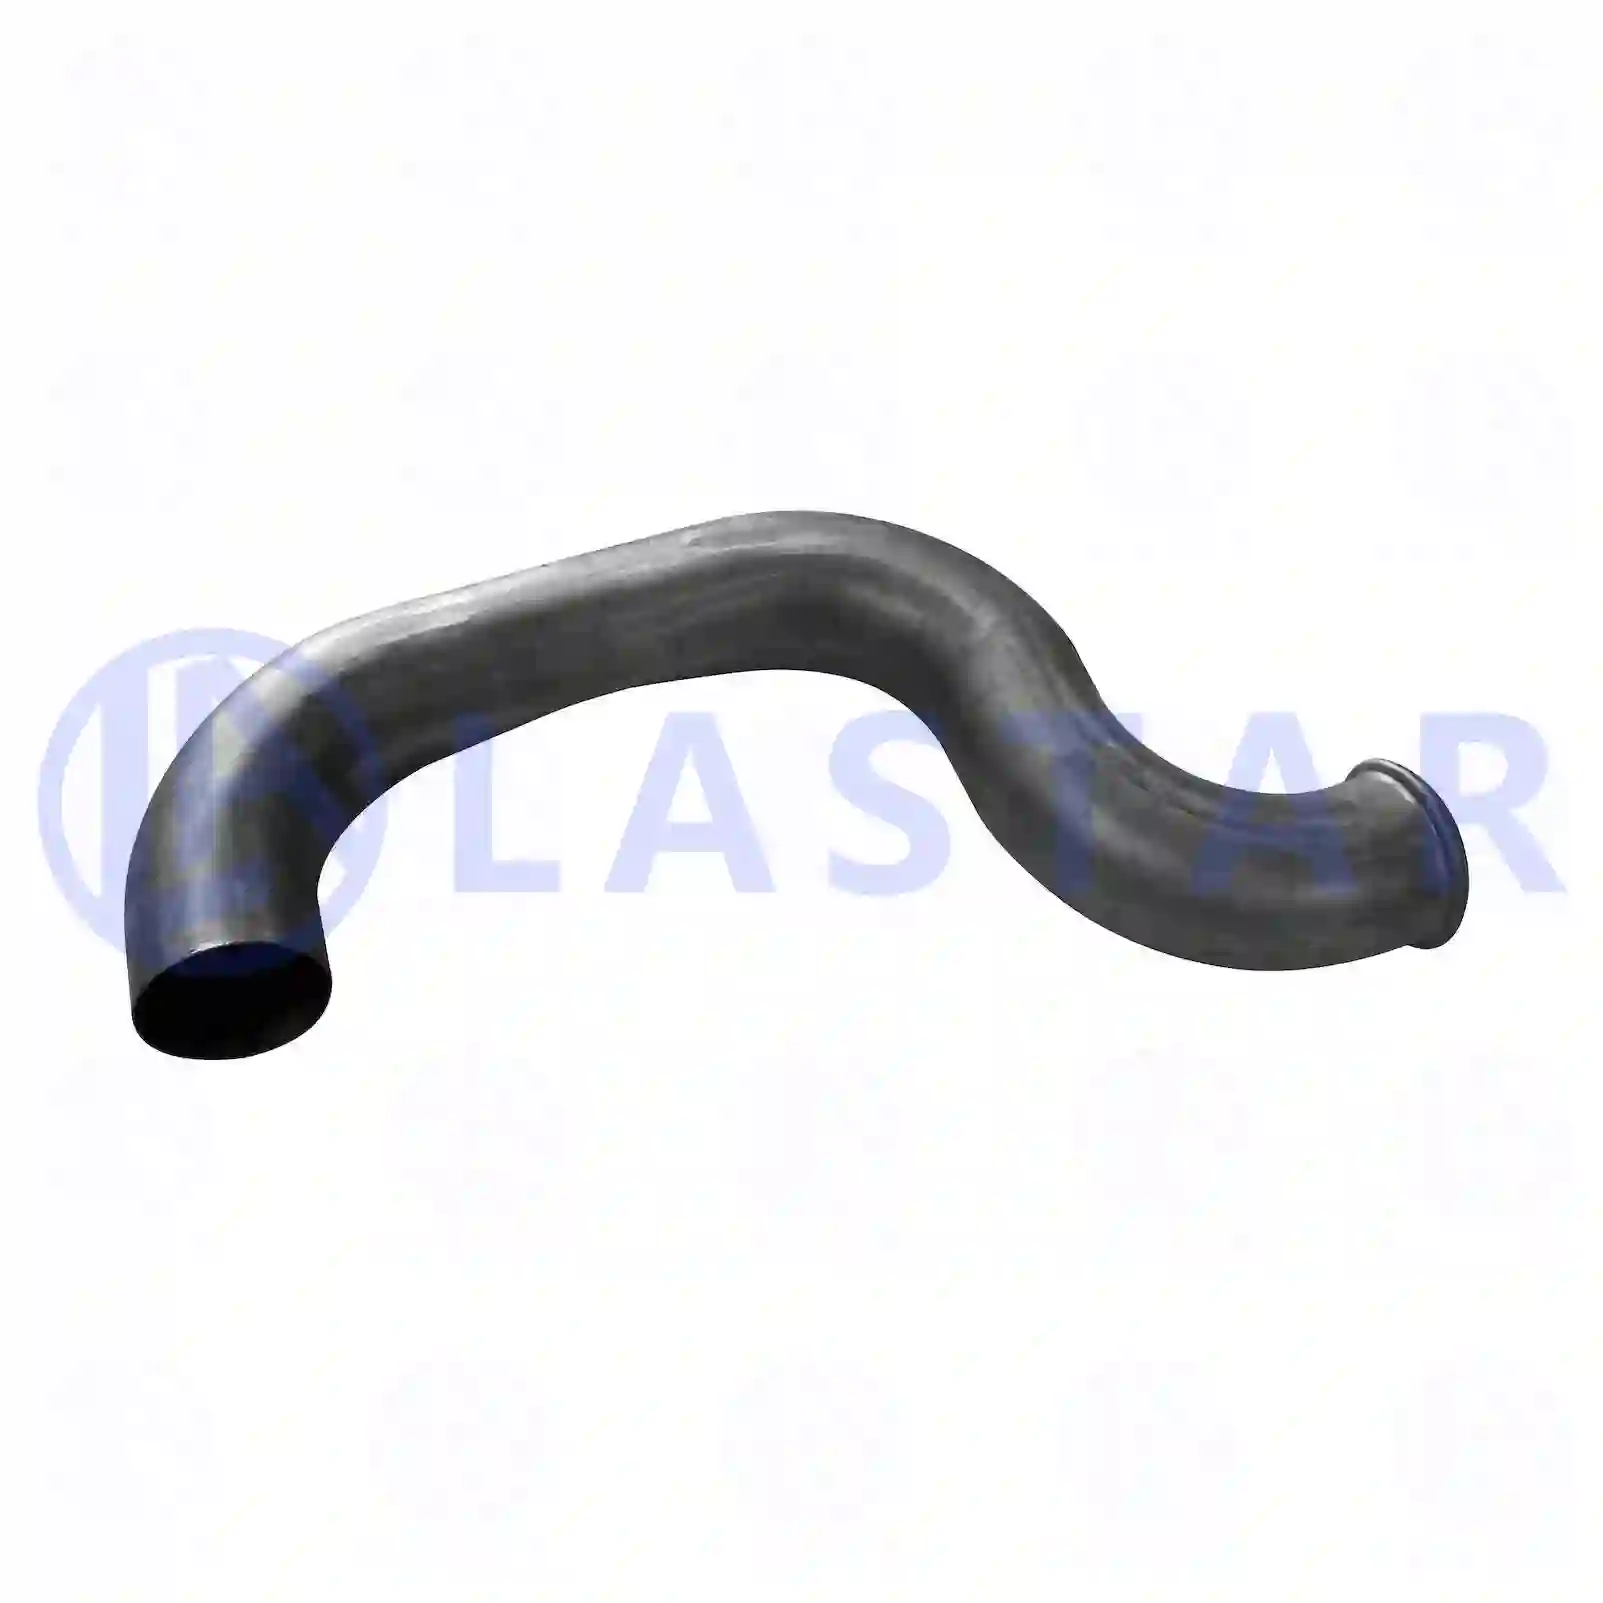 Exhaust pipe, 77706224, 7403943722, 39437 ||  77706224 Lastar Spare Part | Truck Spare Parts, Auotomotive Spare Parts Exhaust pipe, 77706224, 7403943722, 39437 ||  77706224 Lastar Spare Part | Truck Spare Parts, Auotomotive Spare Parts